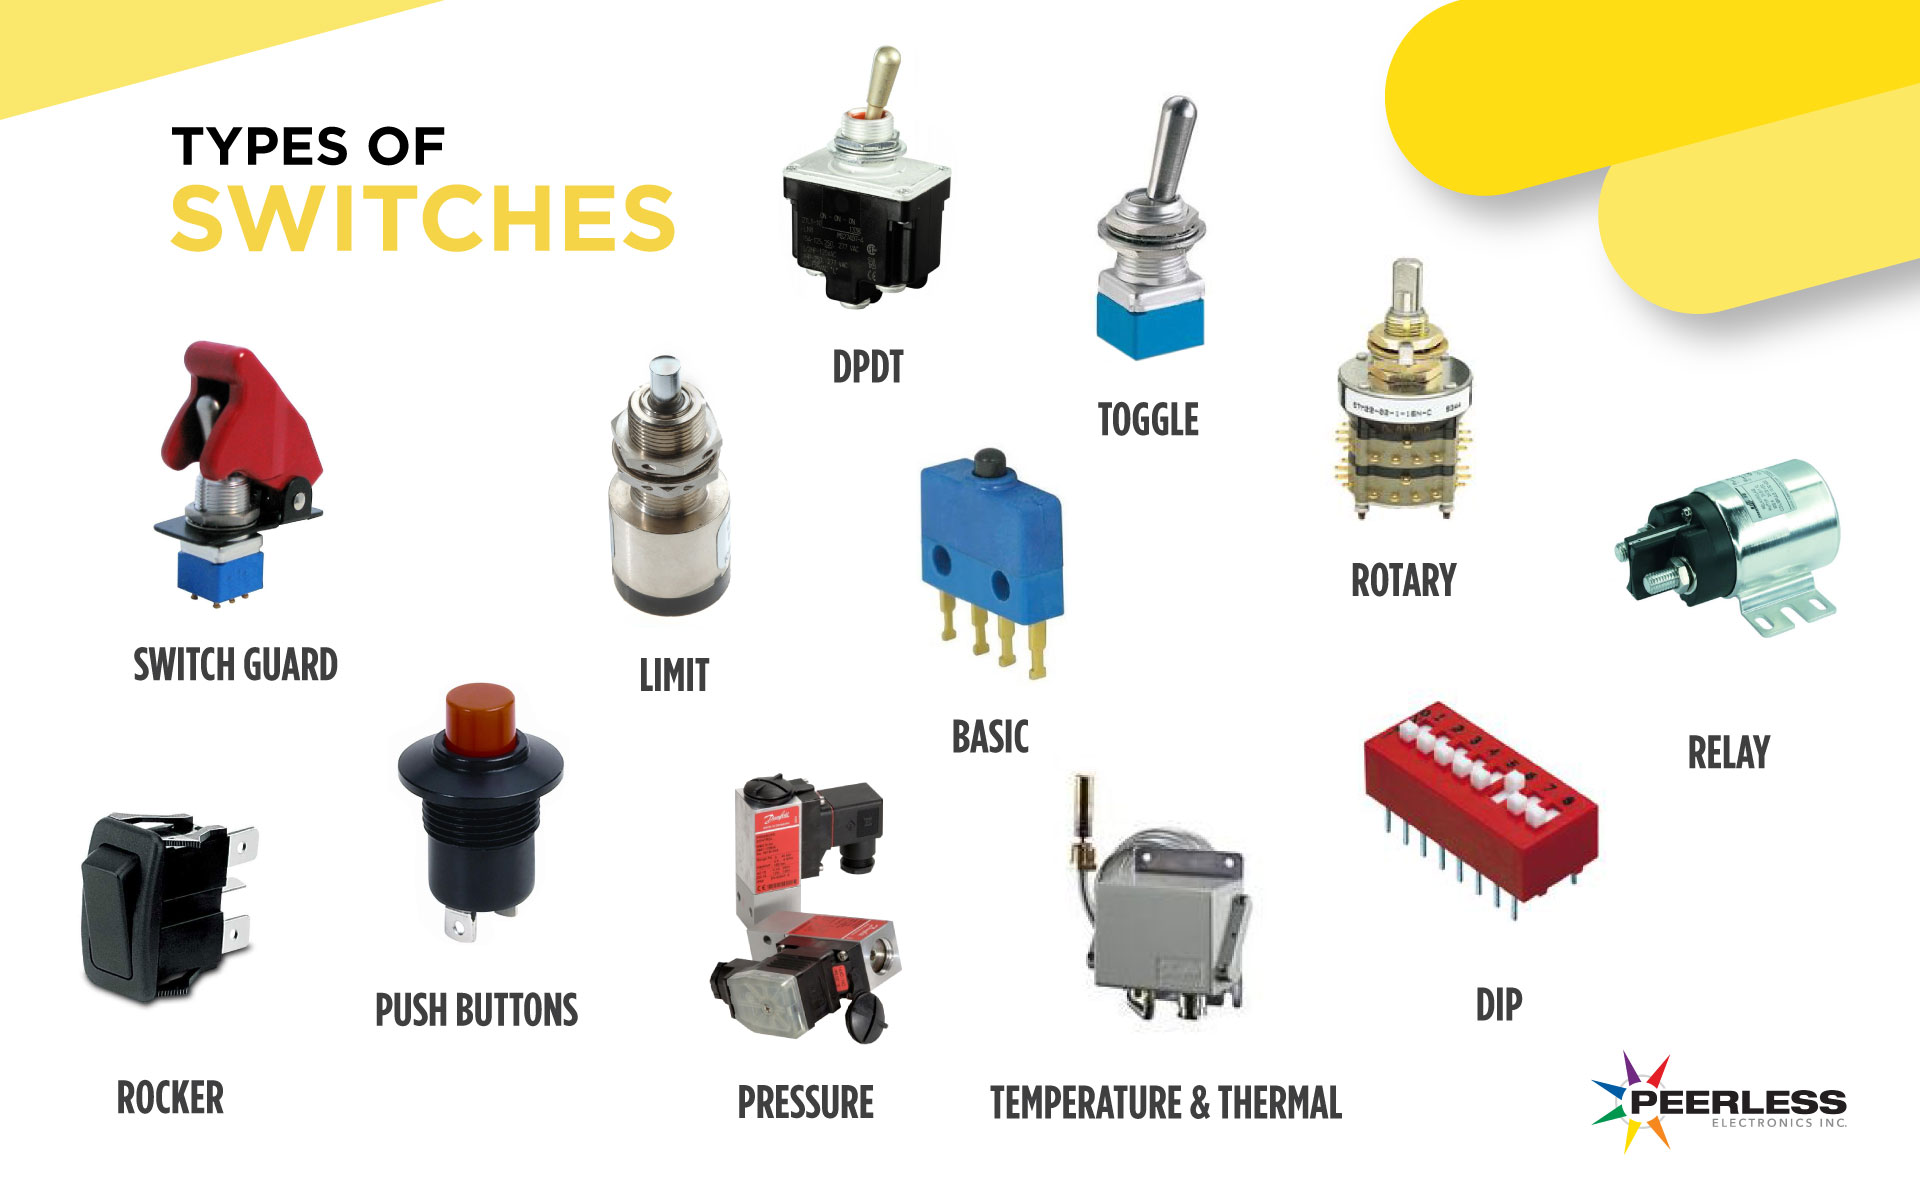 Types & Applications of Electrical Switches | Peerless Electronics ...